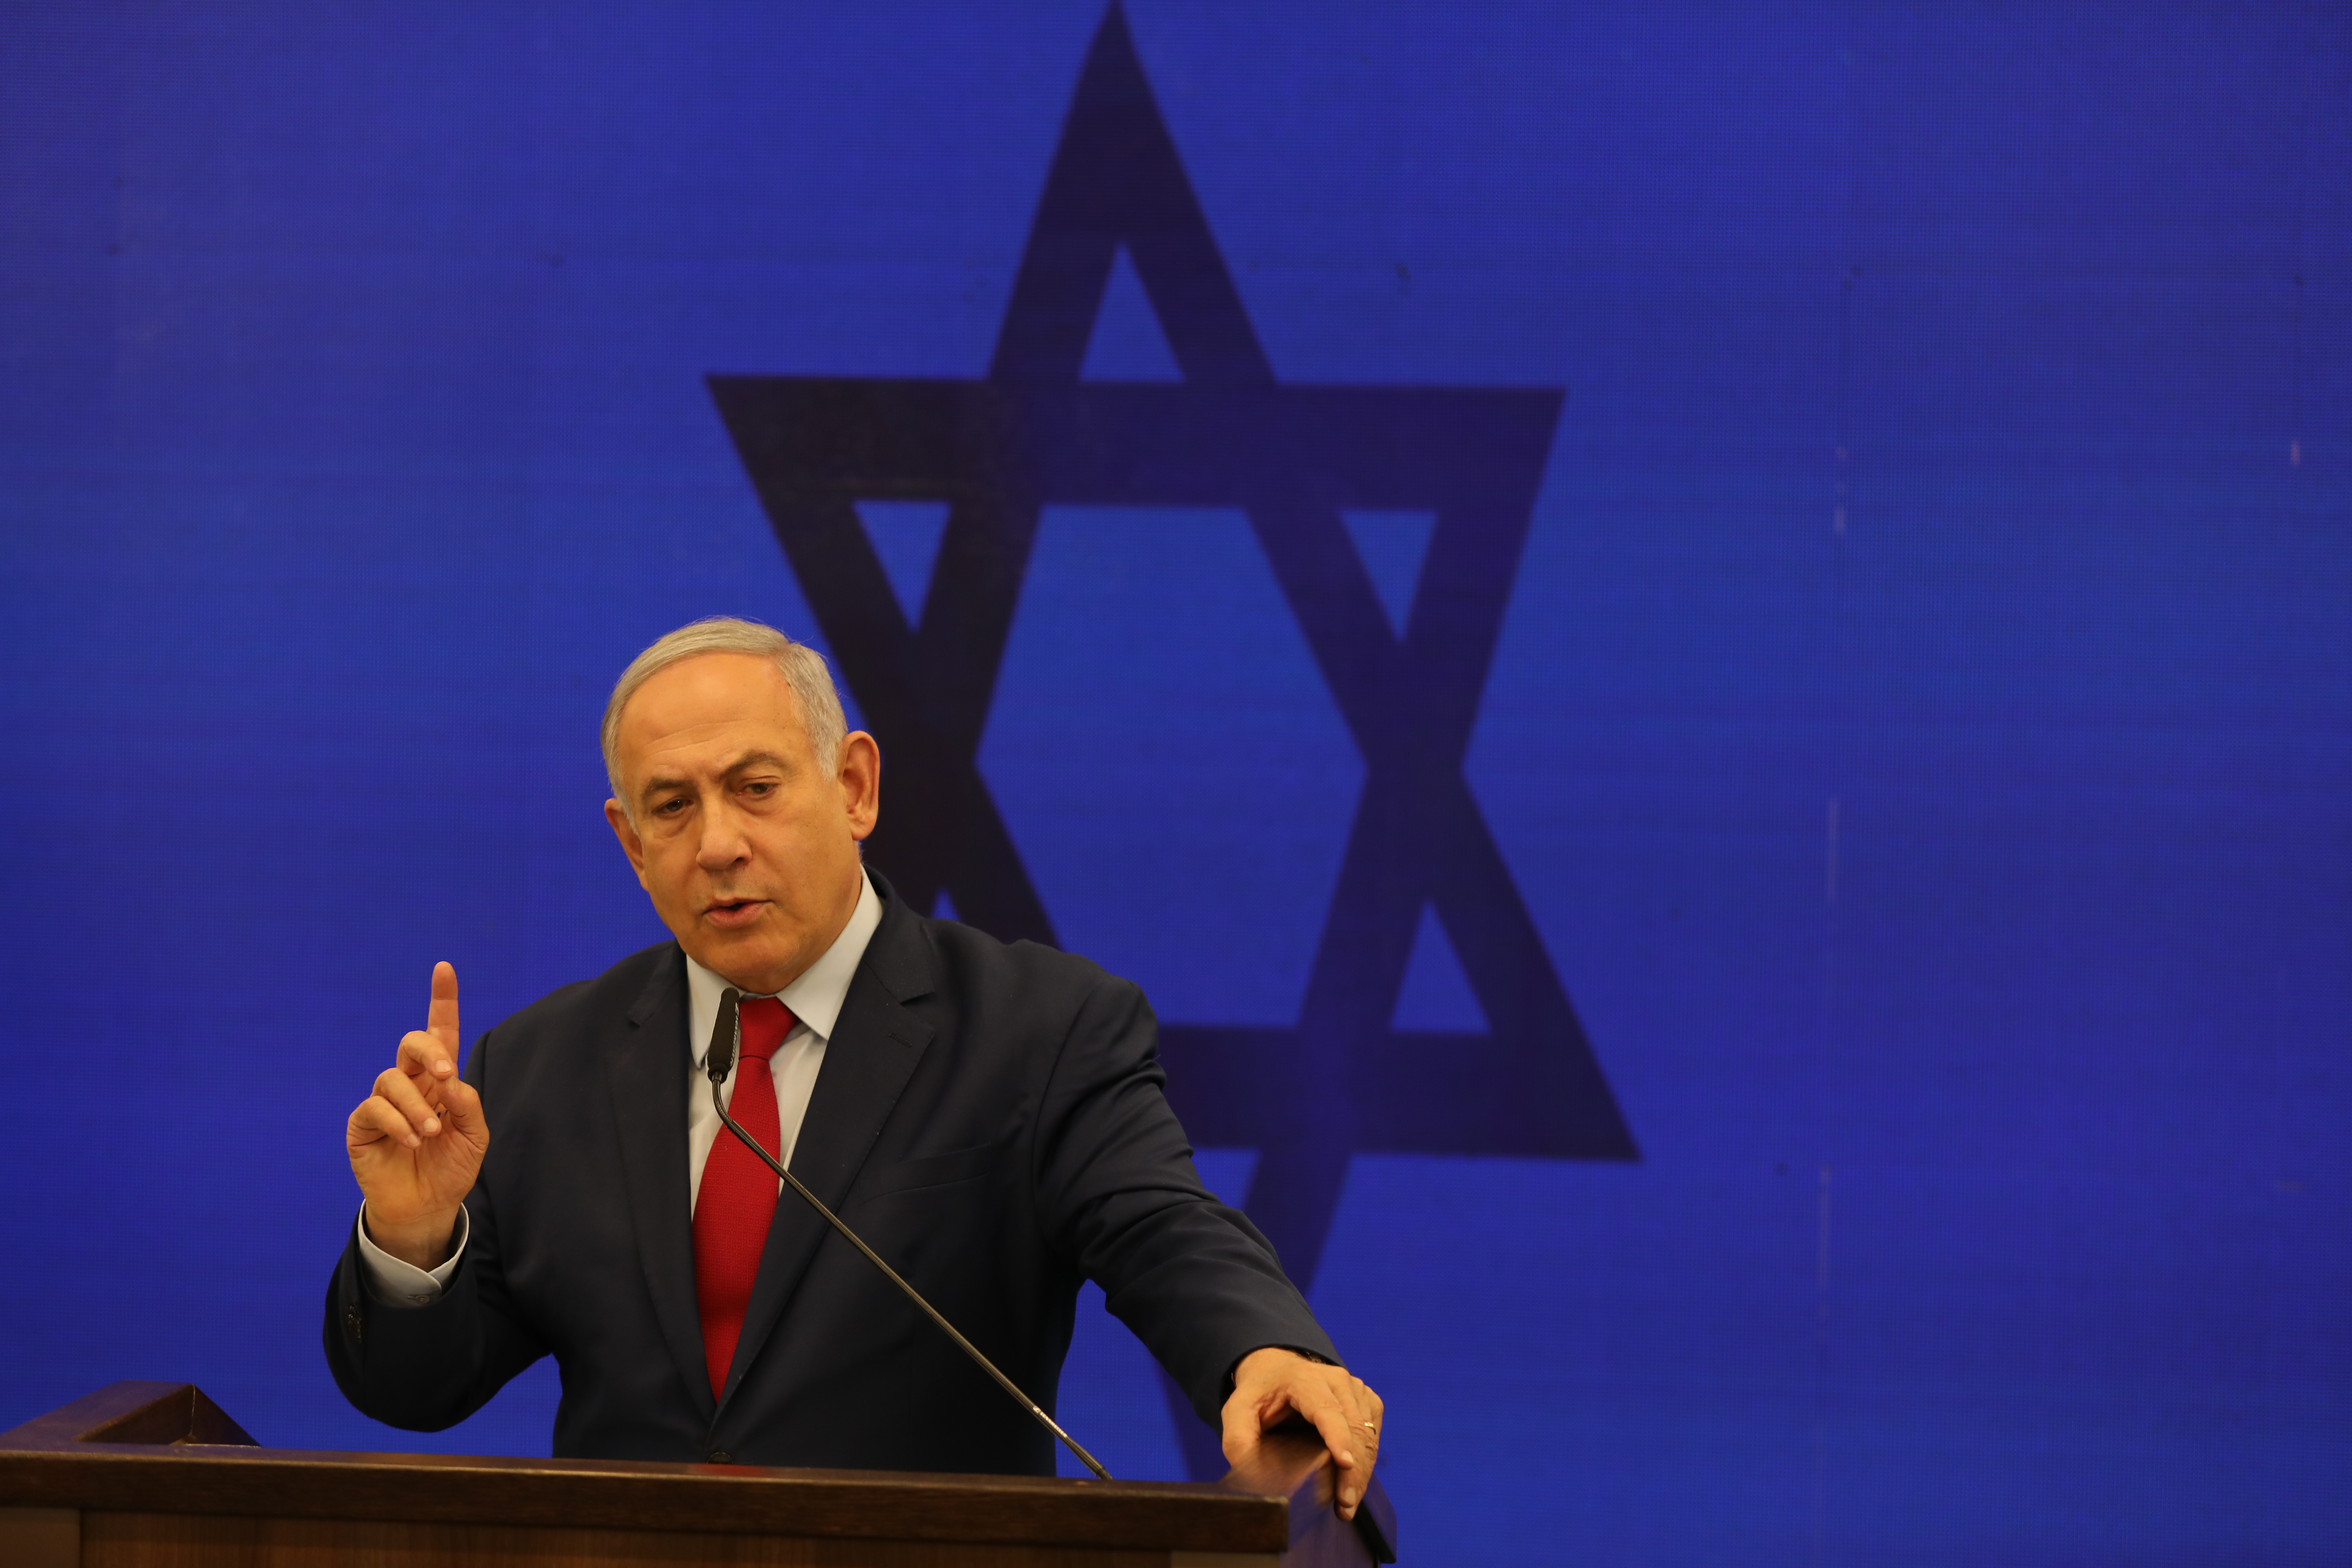 epa07832863 Israeli Prime Minister Benjamin Netanyahu delivers a statement in Ramat Gan near Tel Aviv, Israel, 10 September 2019. Netanyahu has stated its intention to annex and contain Israeli sovereignty over the Jordan Valley in coordination with the US administration immediately after the elections. Israeli legislative election will be held on 17 September.  EPA/ABIR SULTAN